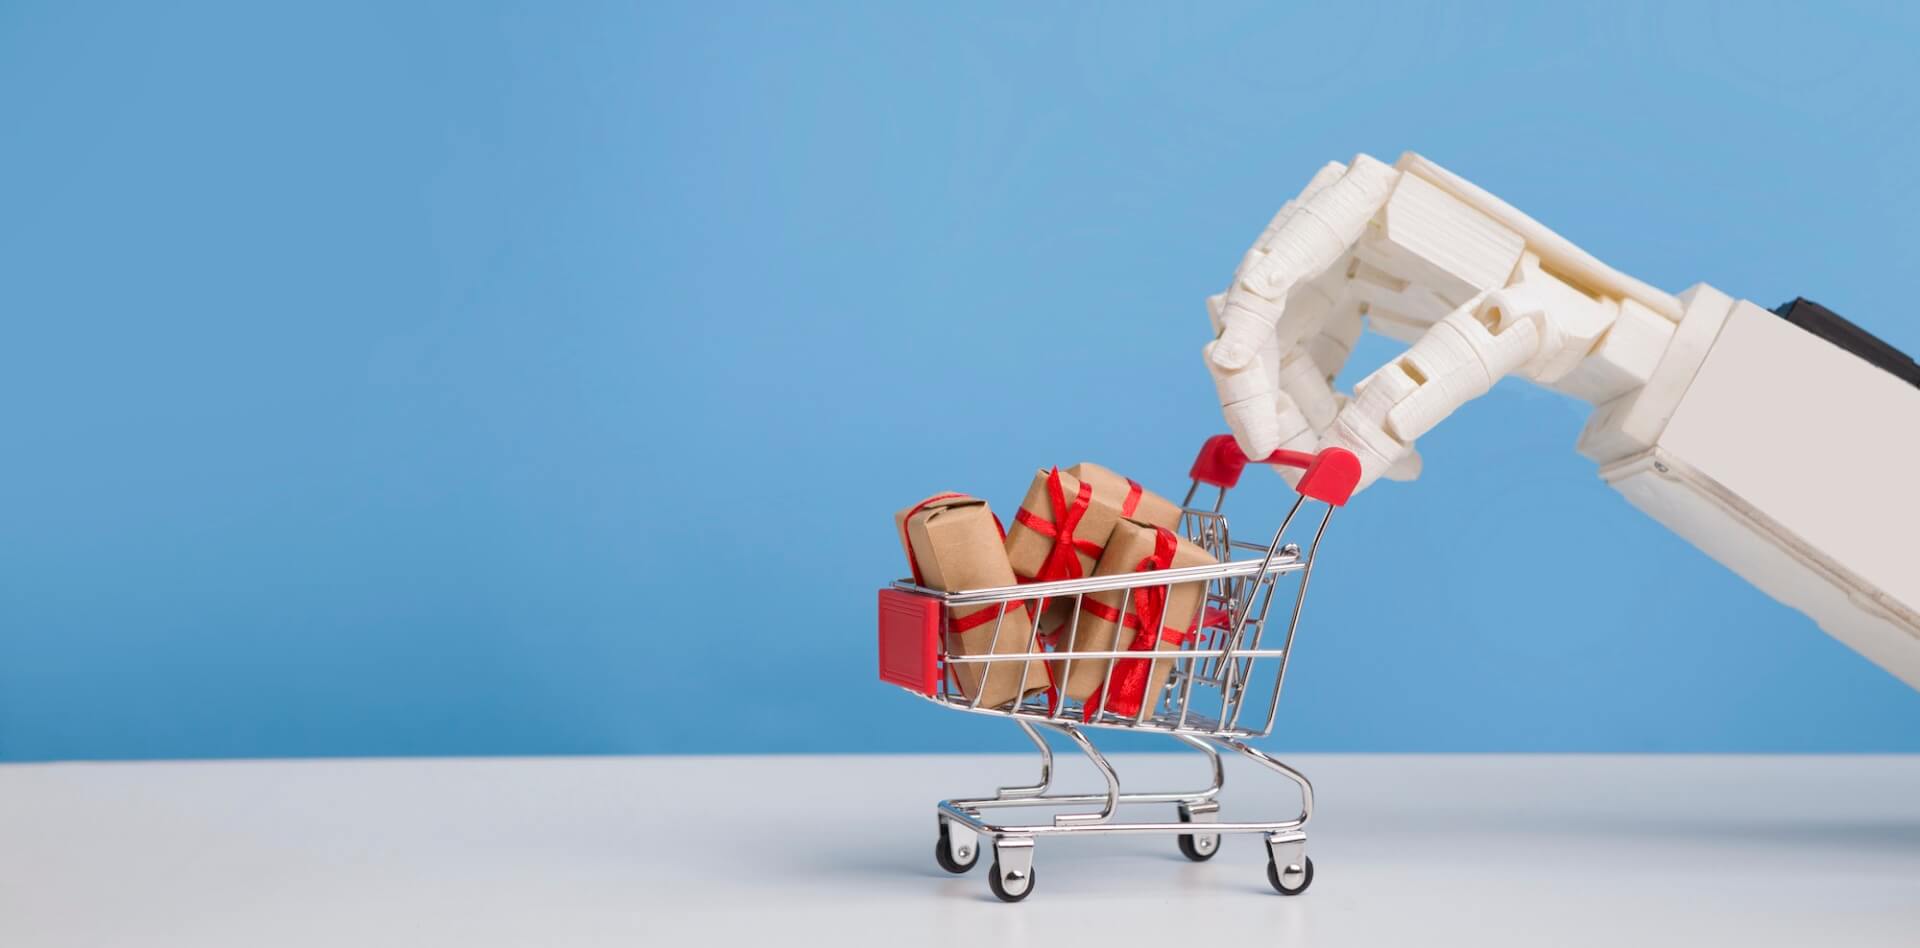 Robot hand with shopping cart full of gift boxes, blue background